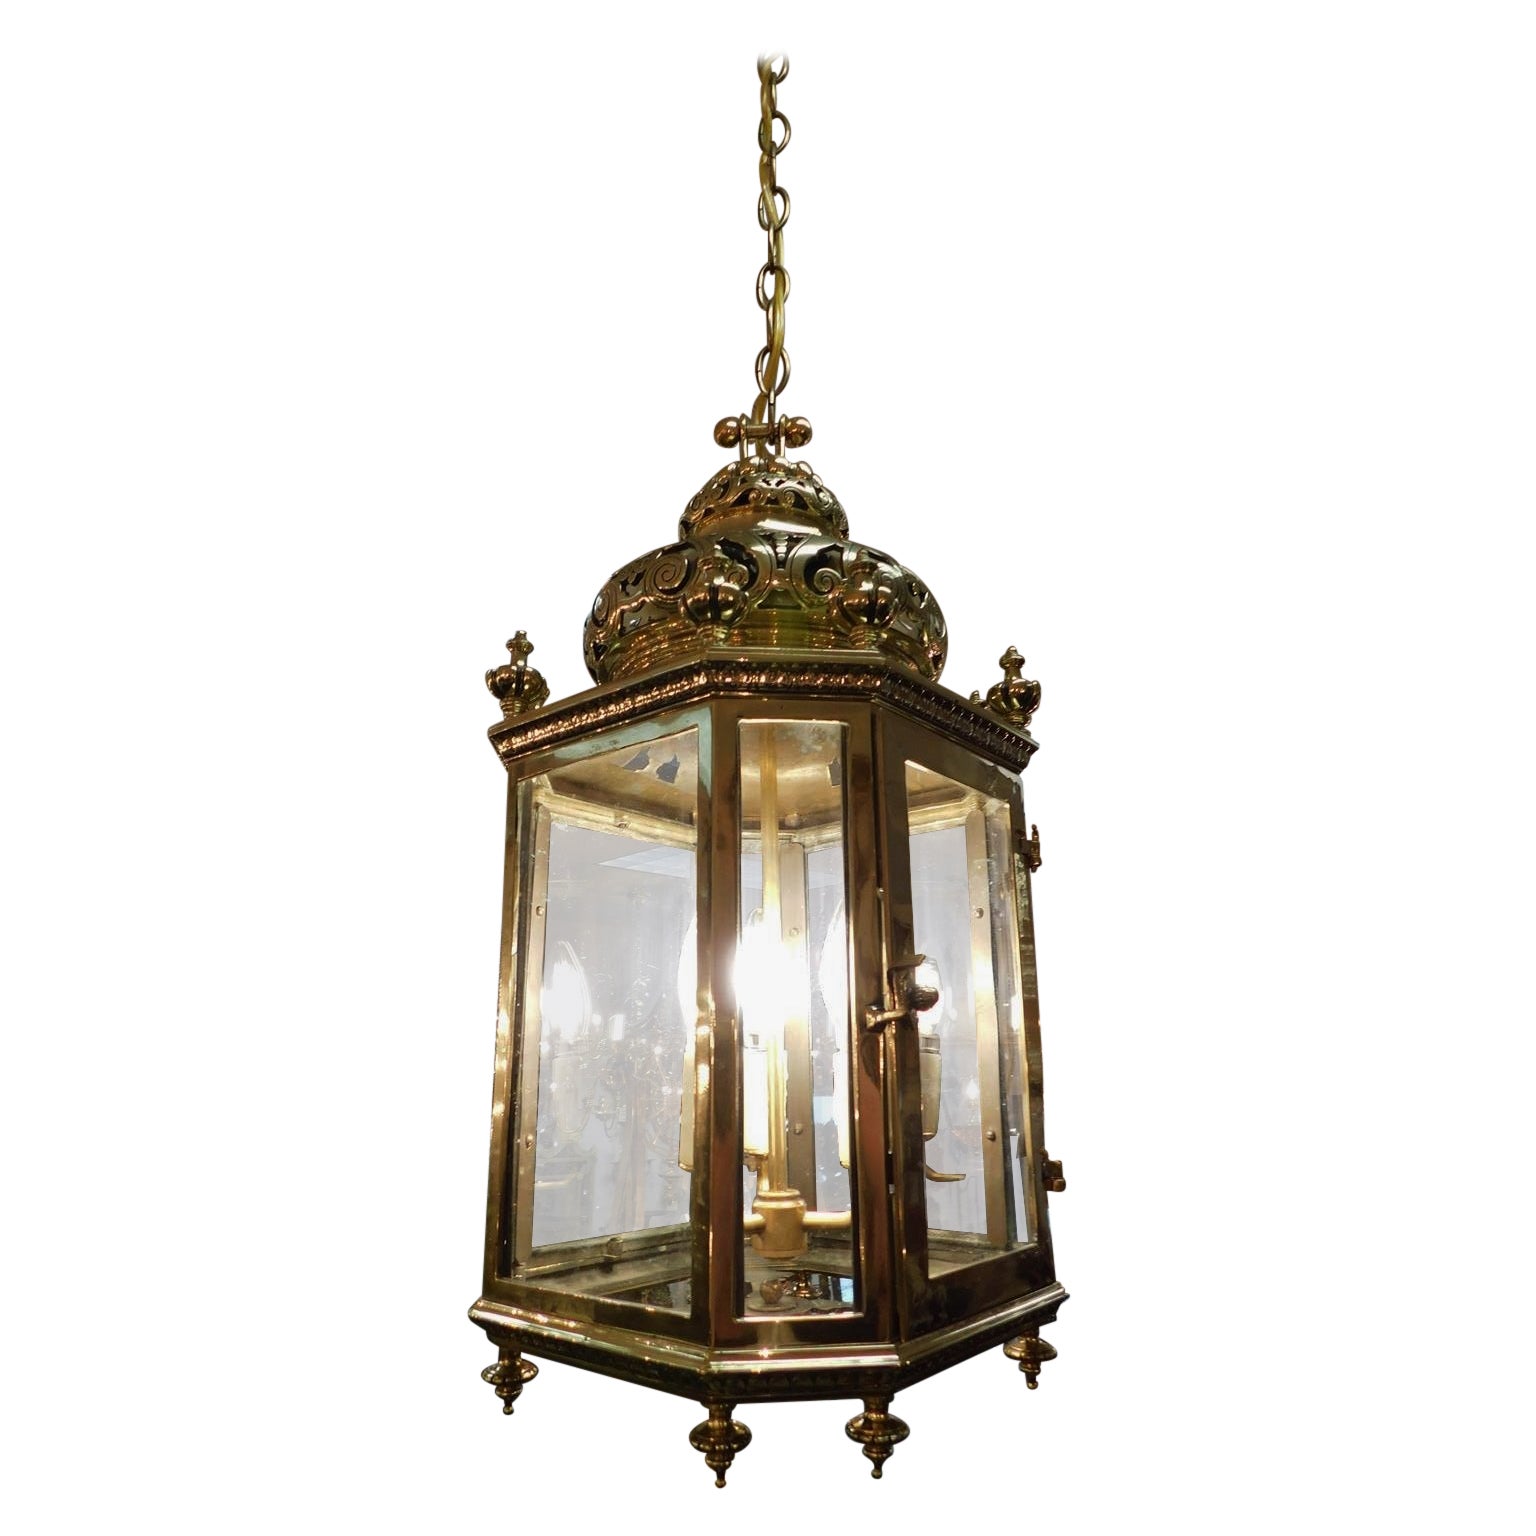 English Brass Octagon Decorative Chased Dome Glass Hall Lantern, Circa 1820 For Sale